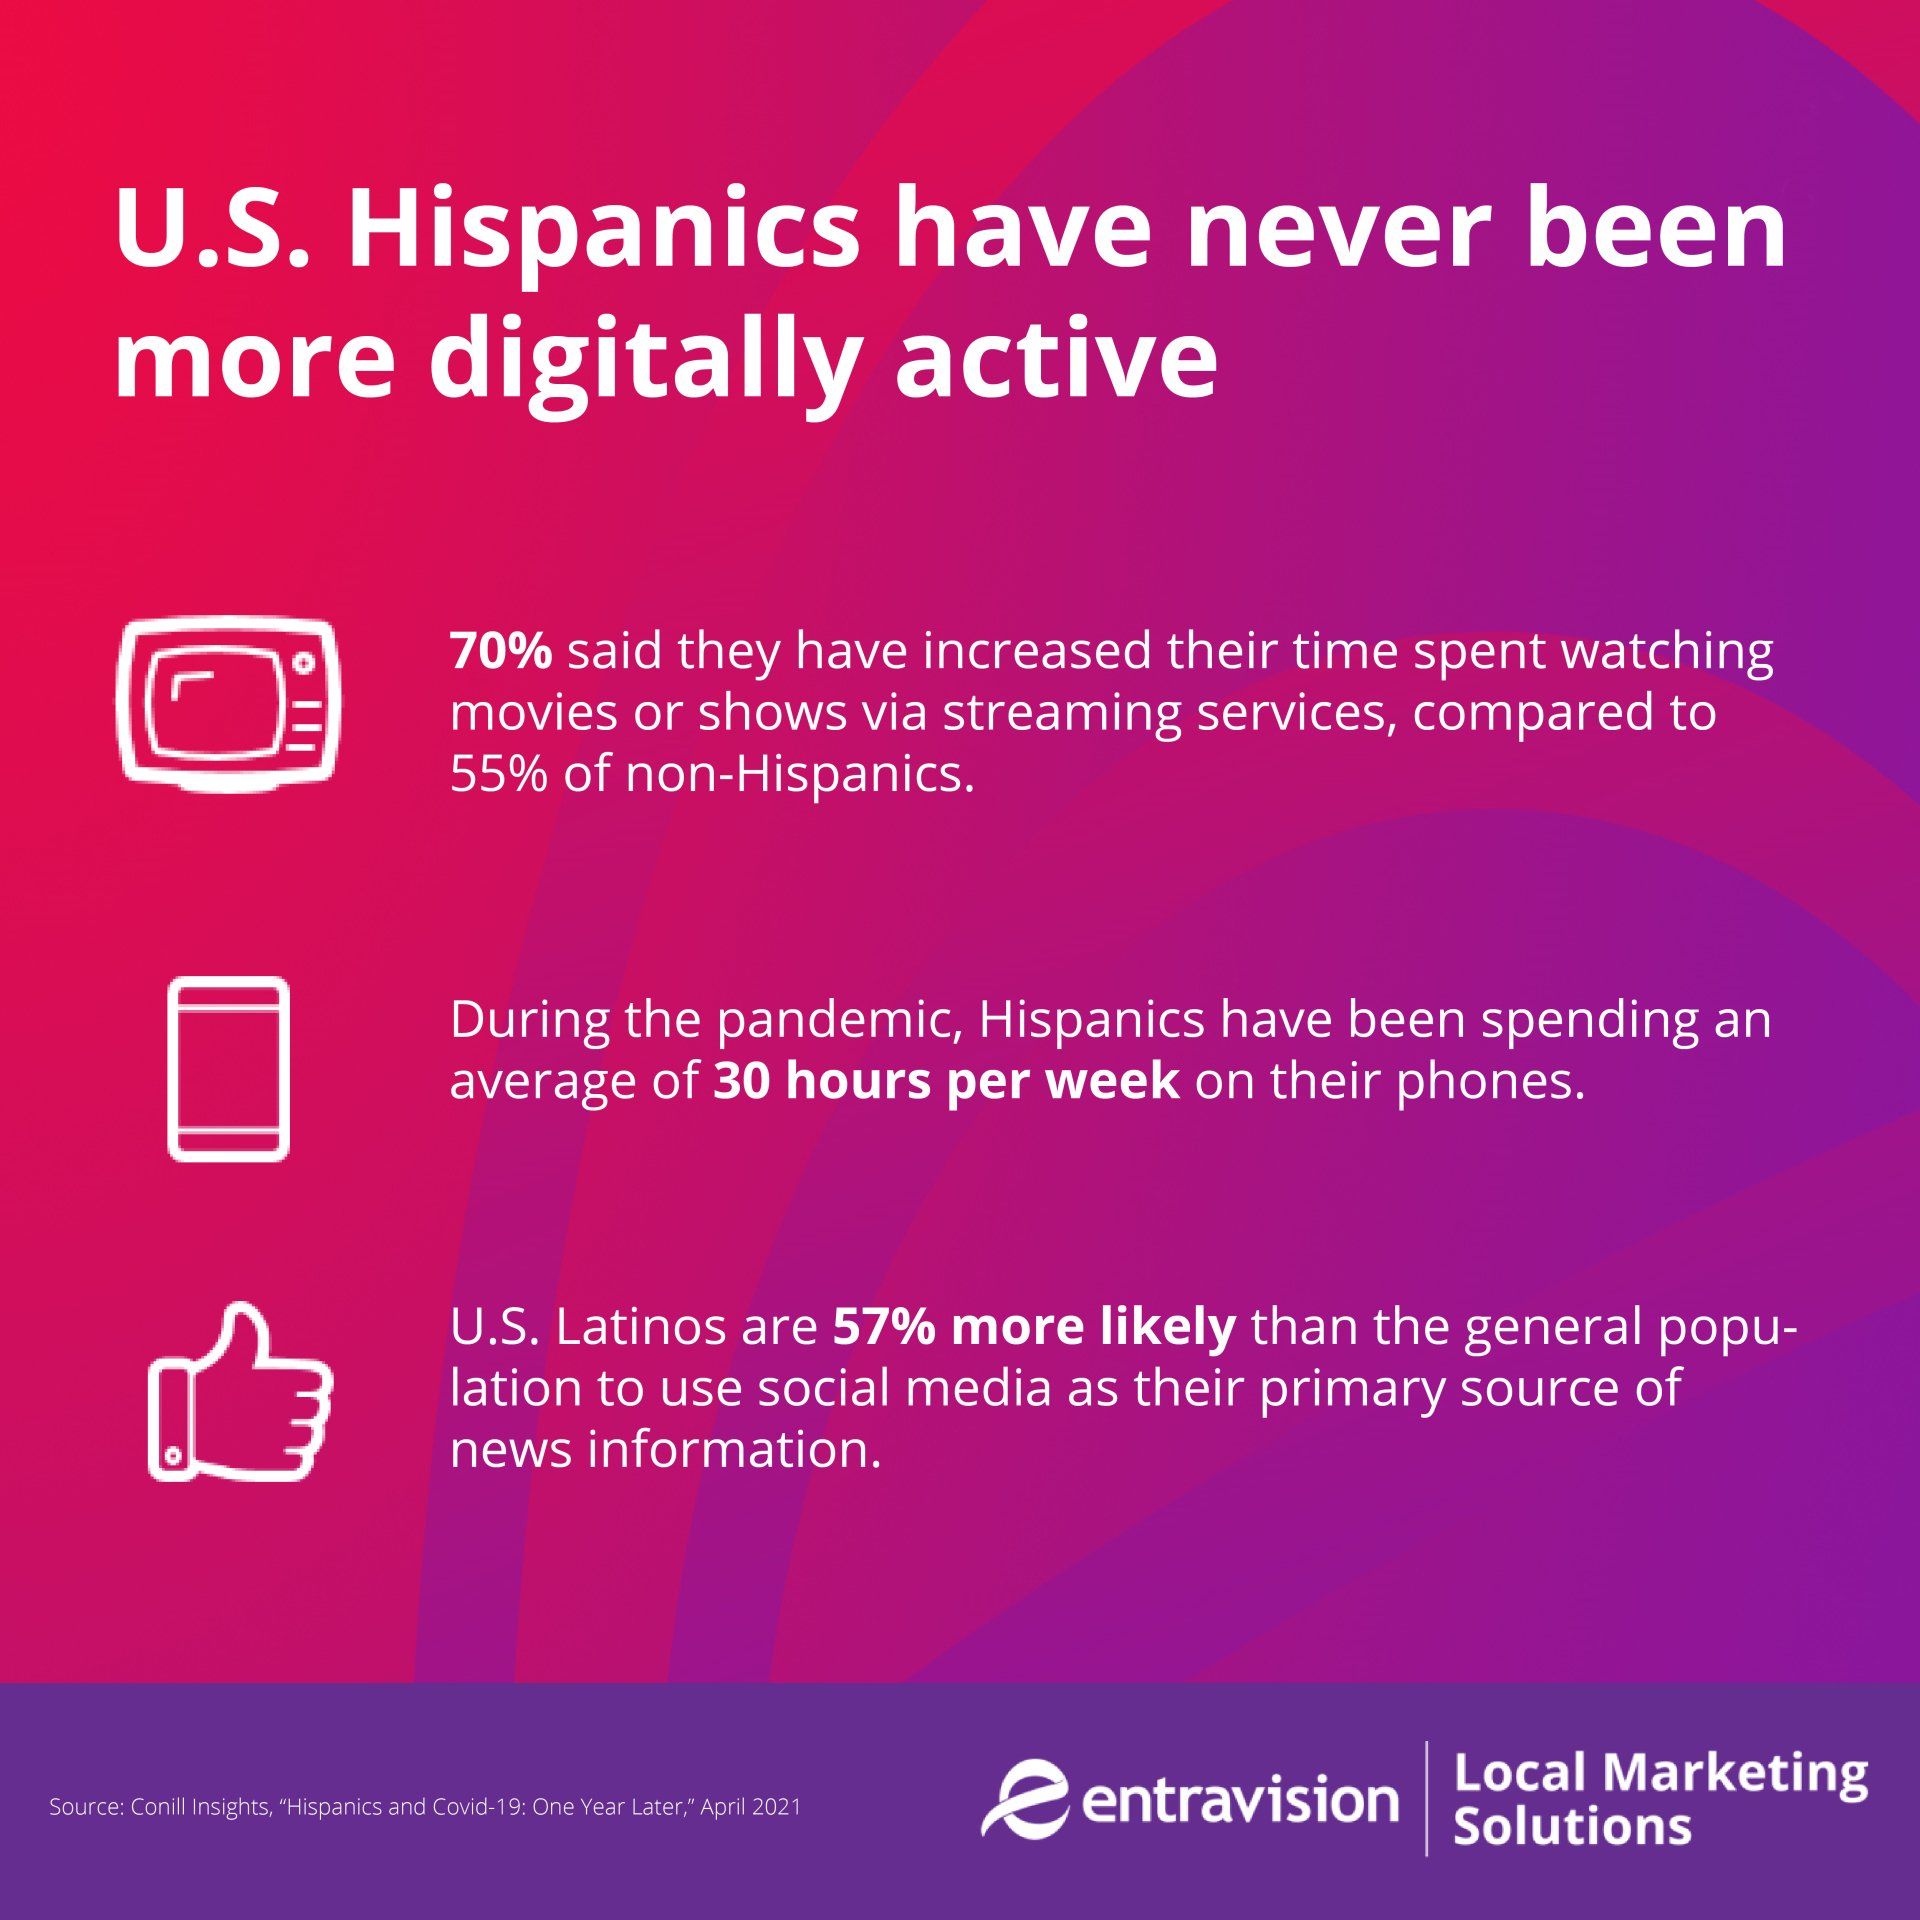 An infographic shows that Hispanic digital habits have skyrocketed throughout the pandemic, making Hispanic digital marketing a great way to reach them.